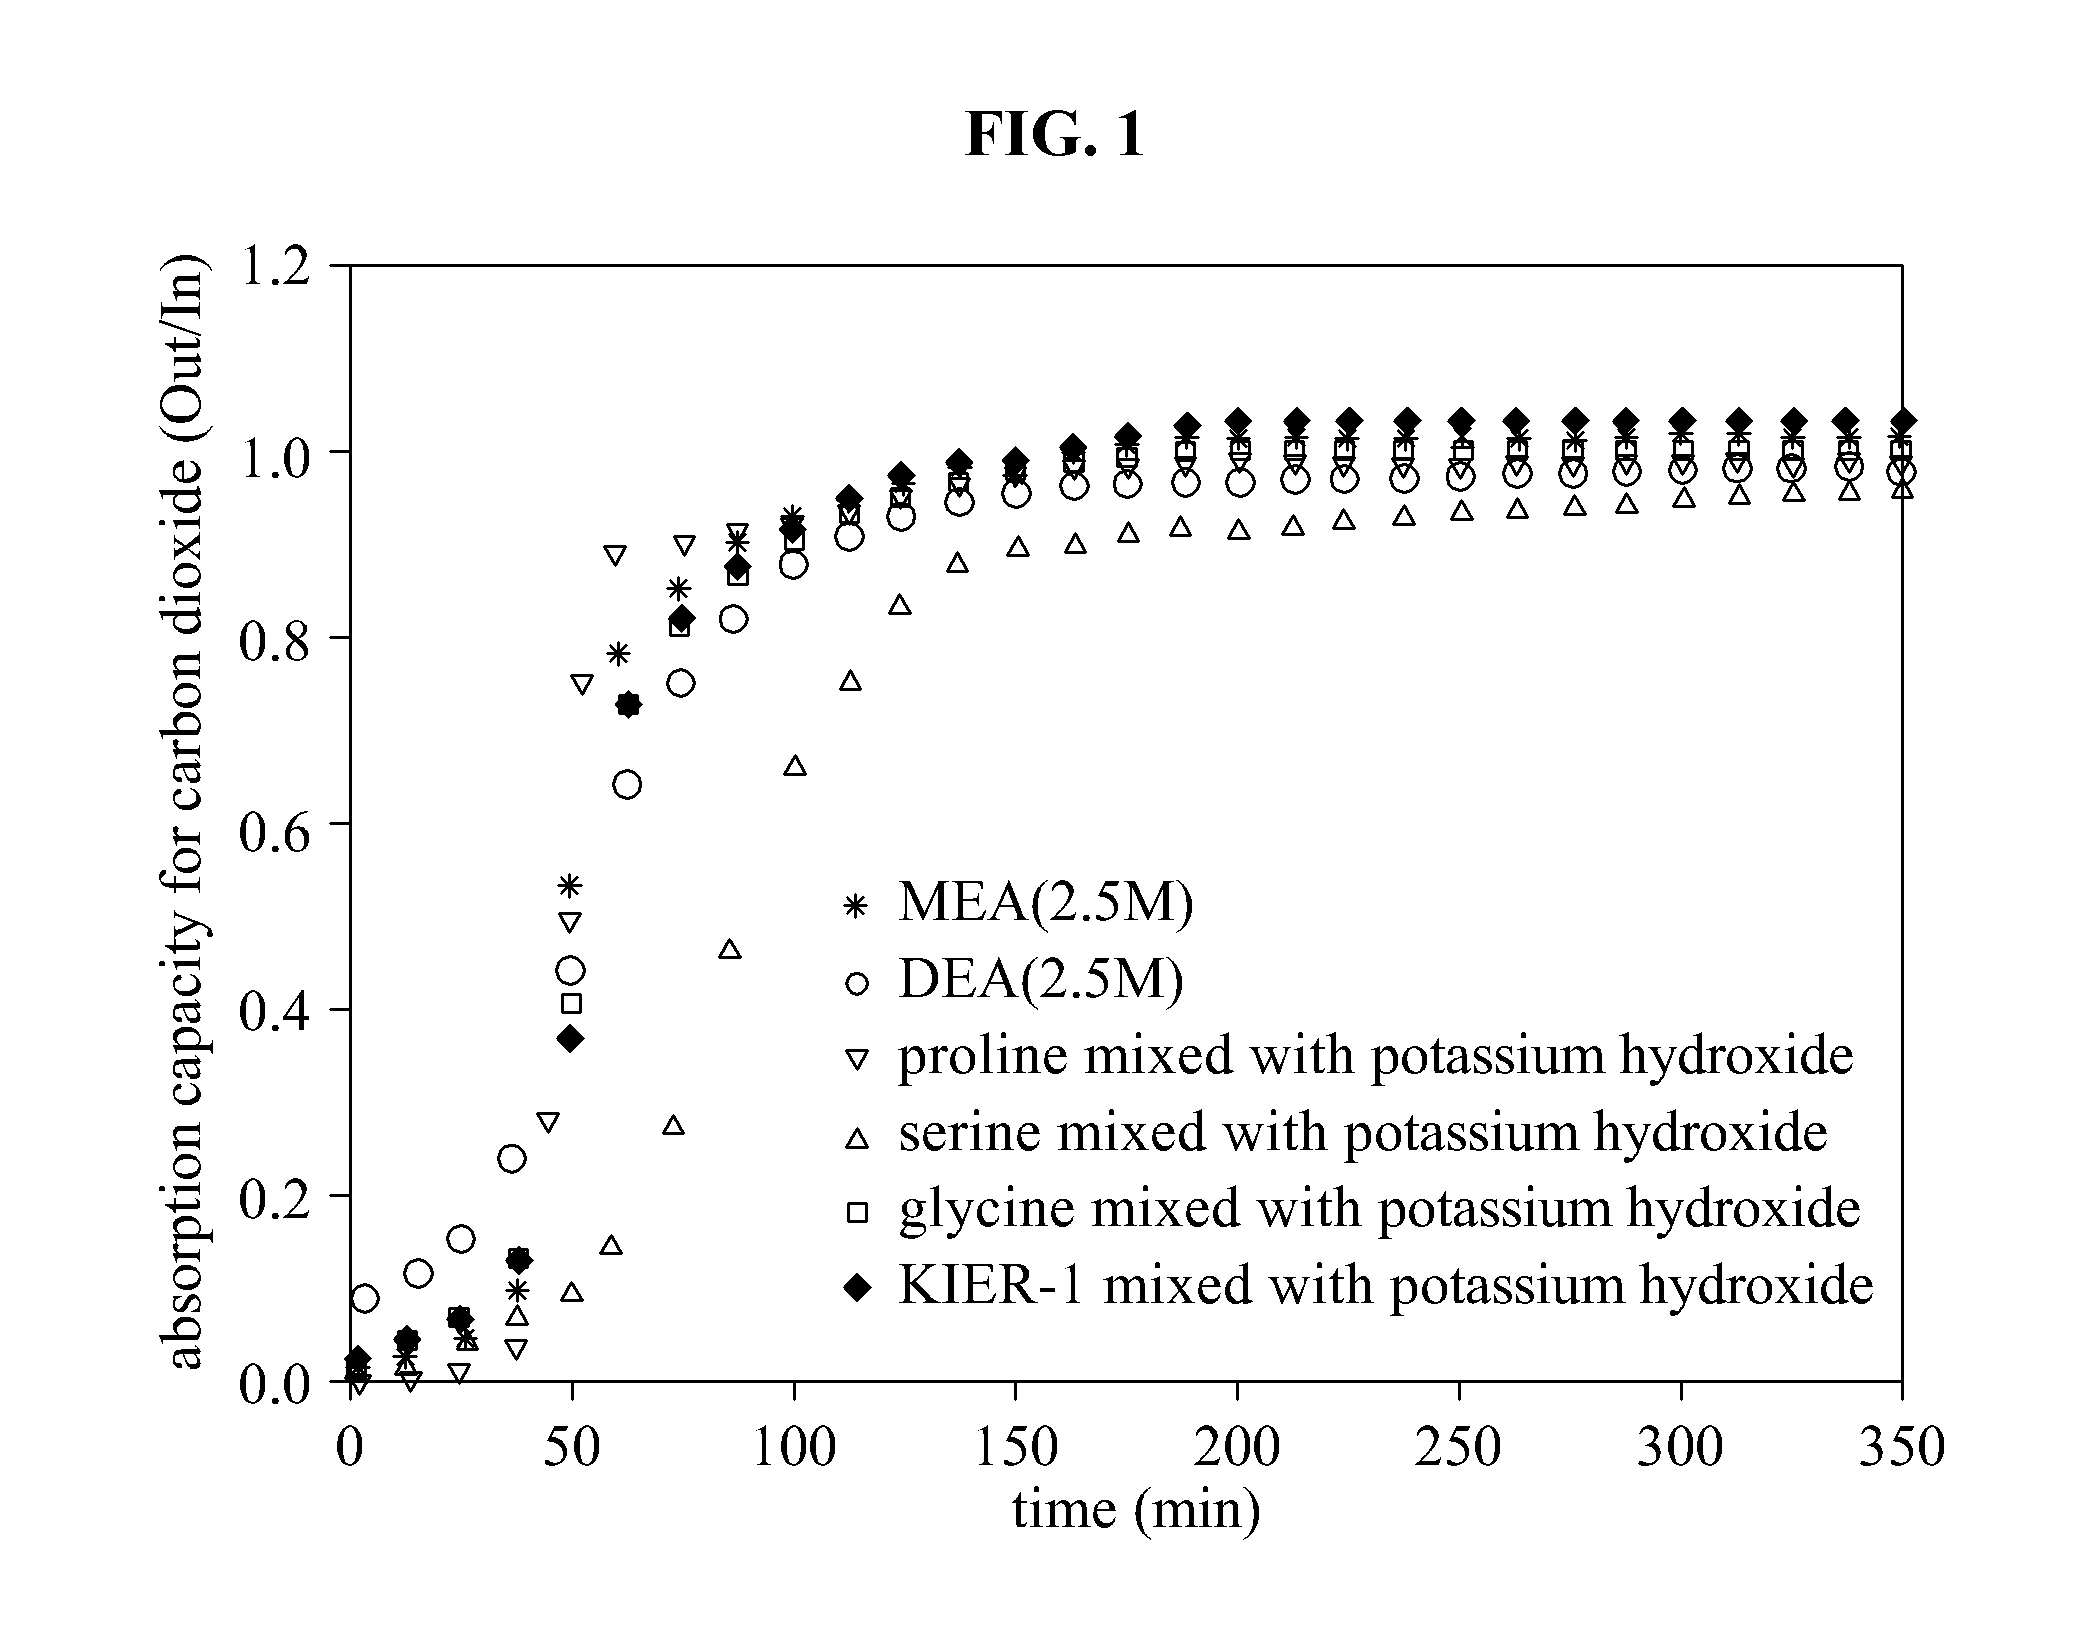 Absorbent for capturing cardon dioxide including amino acid having multi amine groups and metal hydroxide